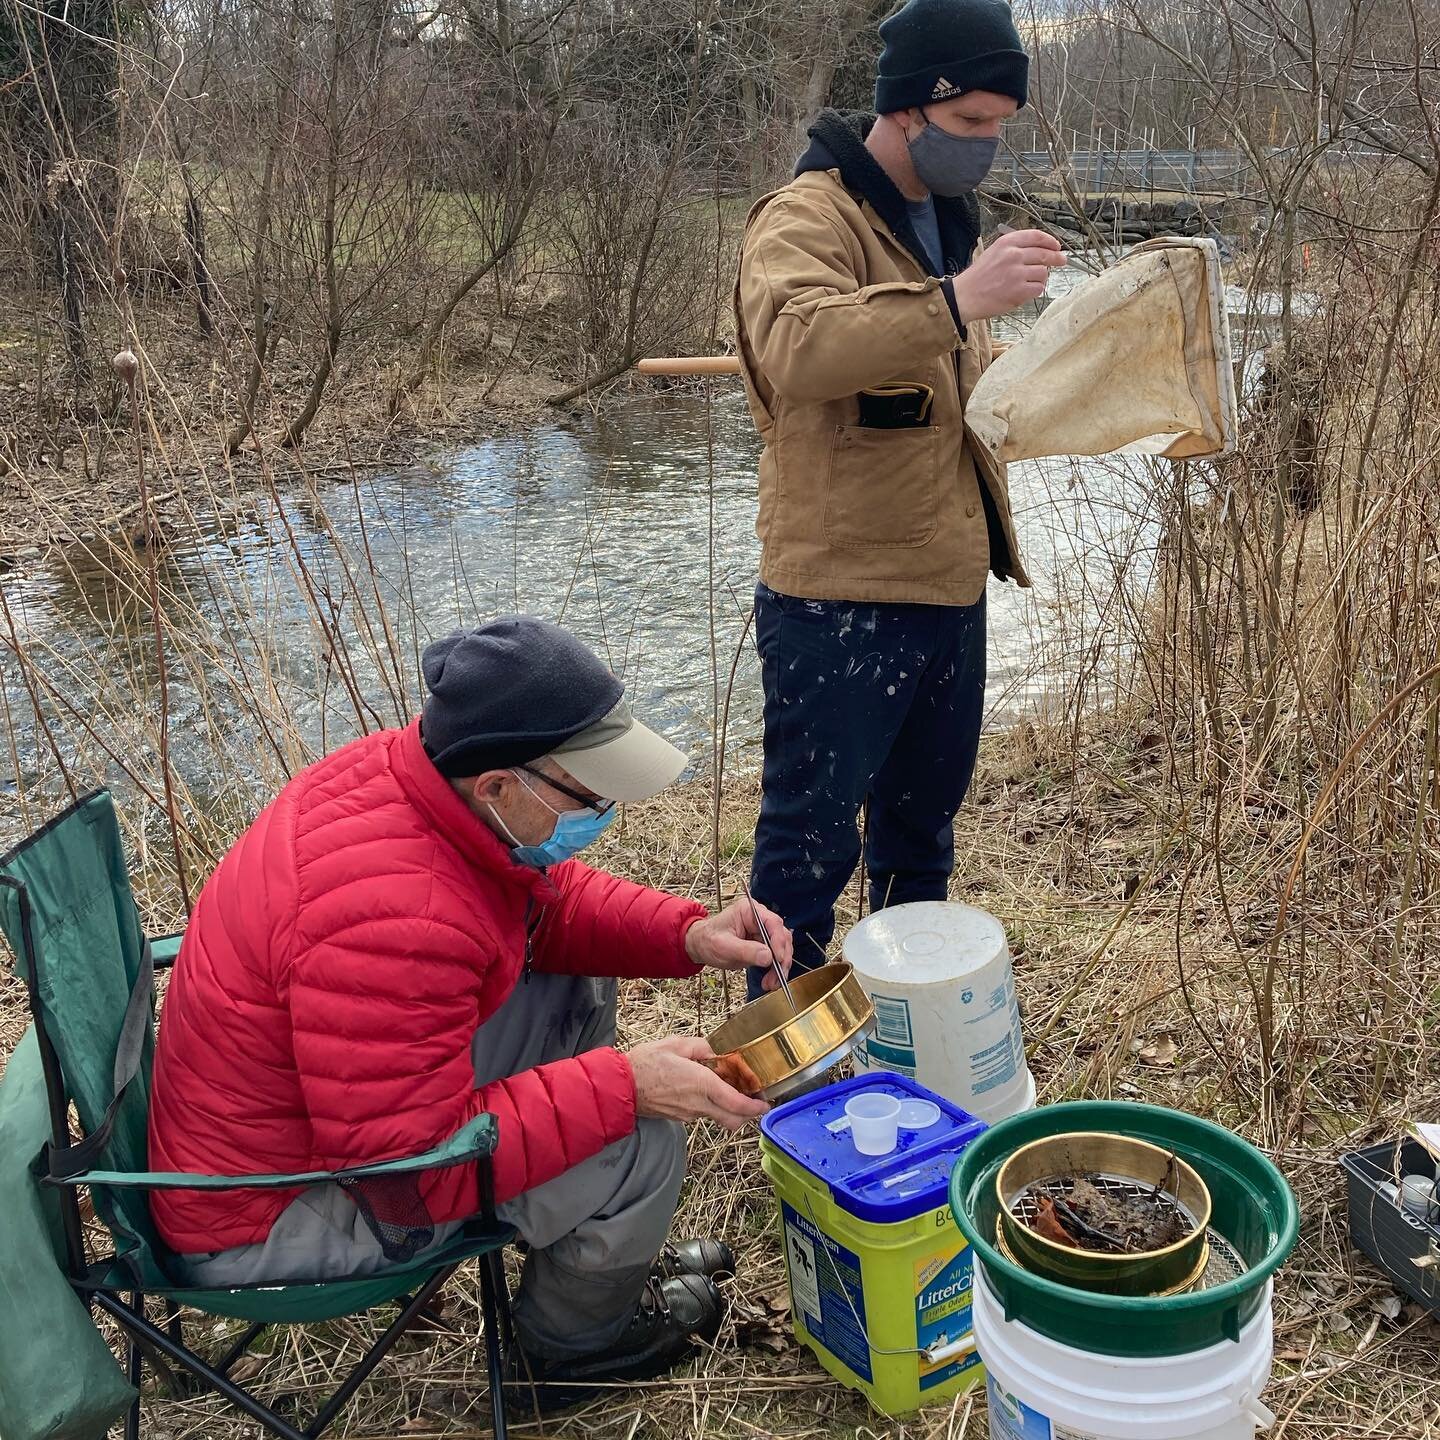 Brrrr! A small team of volunteers were bundled up for our first day out collecting aquatic insects. The variety and types of &ldquo;benthic macroinvertebrates&rdquo; can tell us the health of our stream&rsquo;s habitat &amp; water quality. Go Team!
.